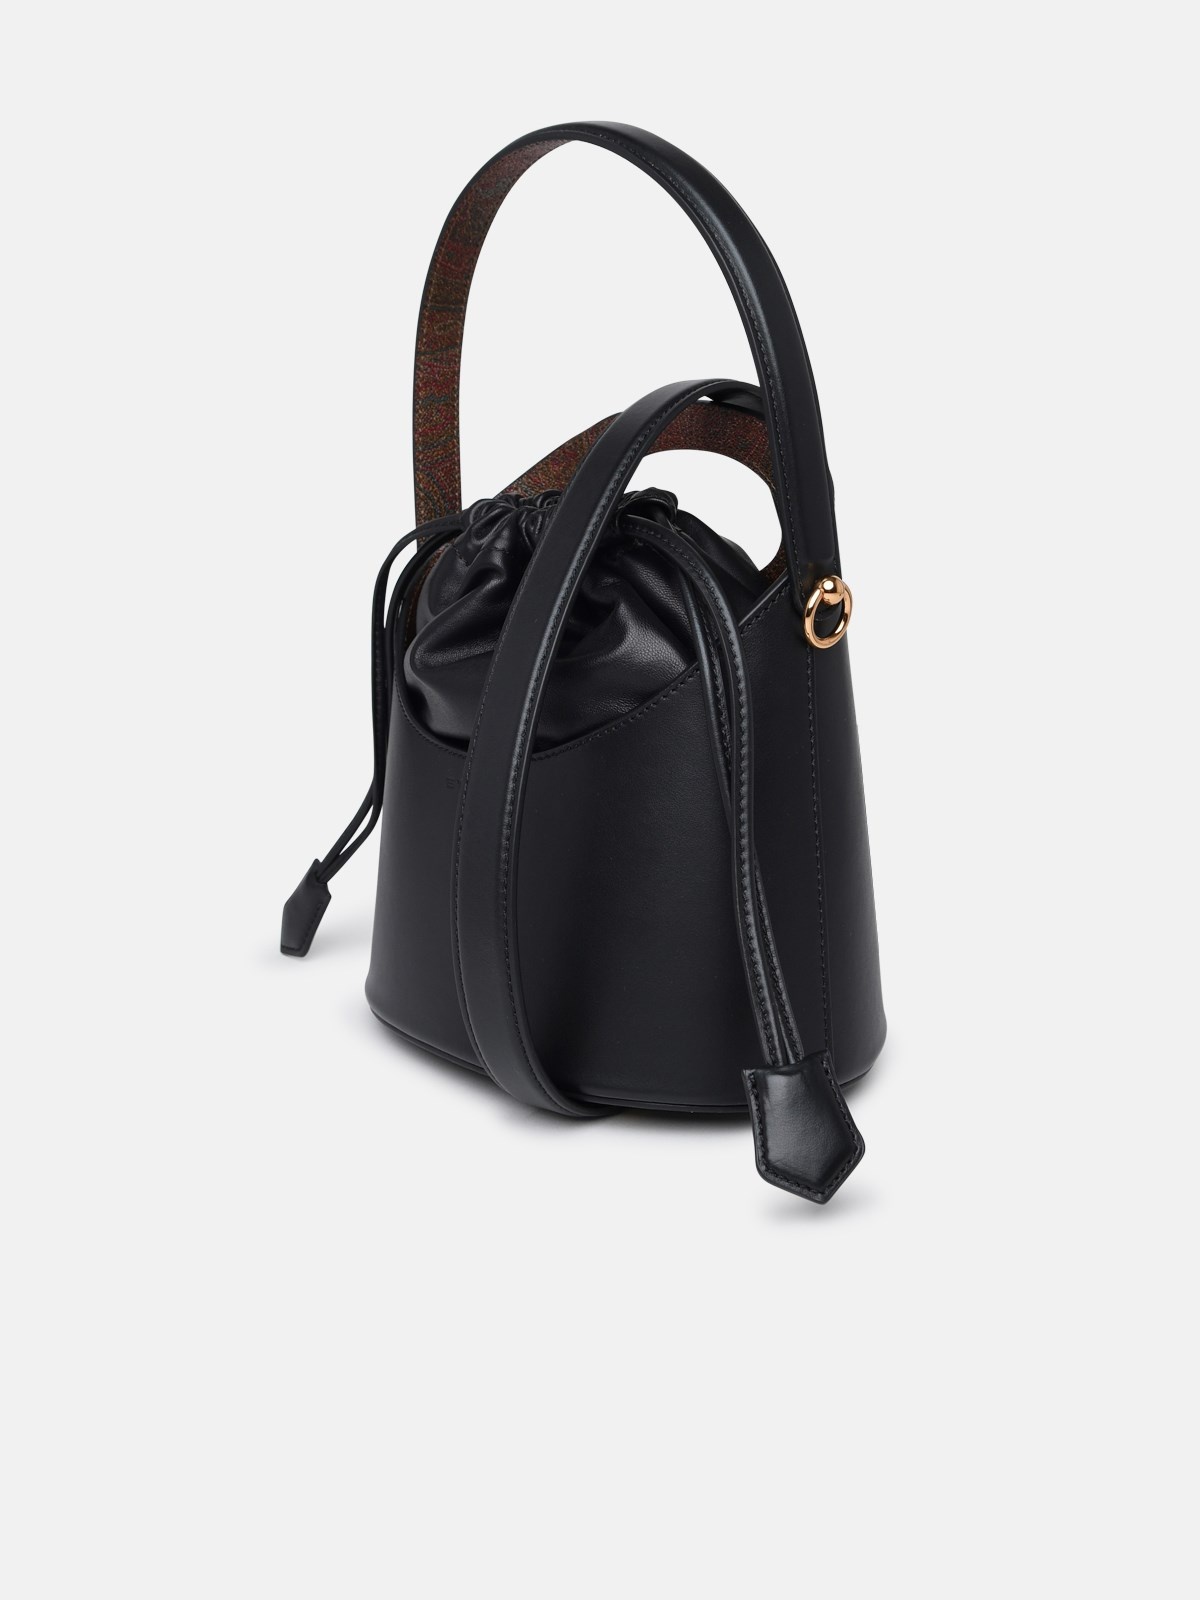 LARGE 'SATURNO' BAG IN BLACK LEATHER - 2